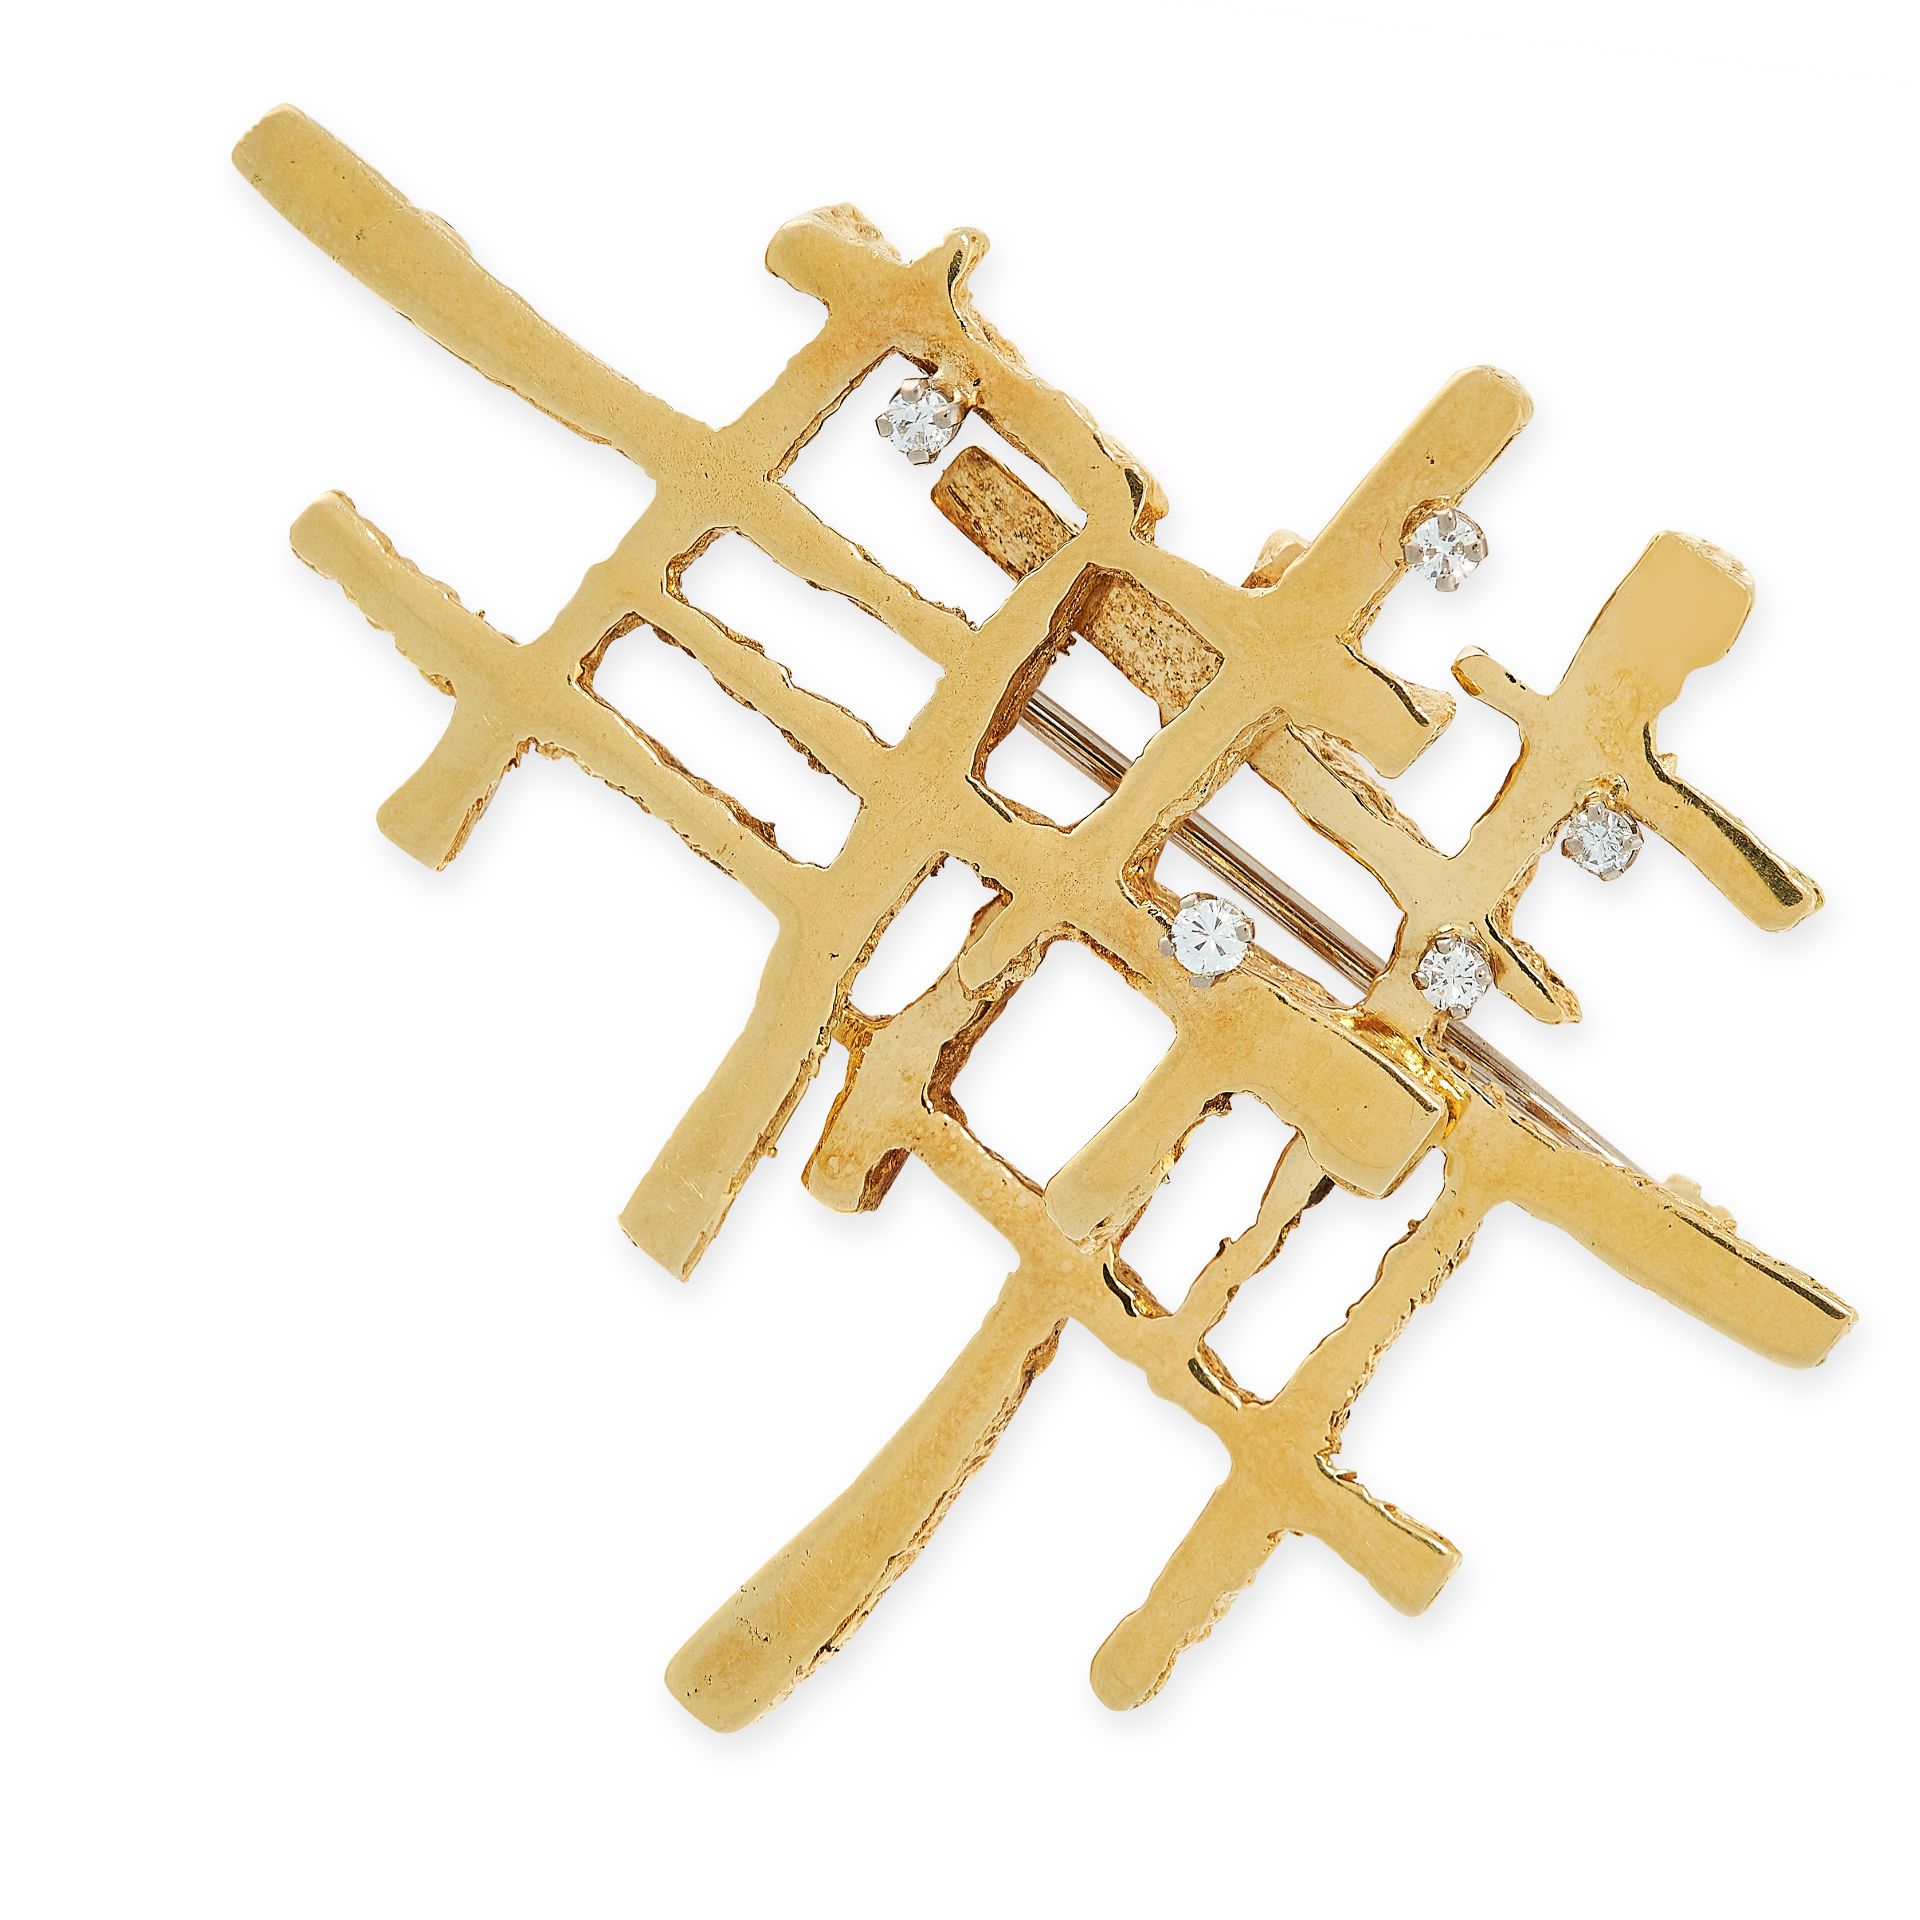 A MODERNIST DIAMOND BROOCH, GILLIAN E PACKARD, 1970 in 18ct yellow gold, of abstract design, with